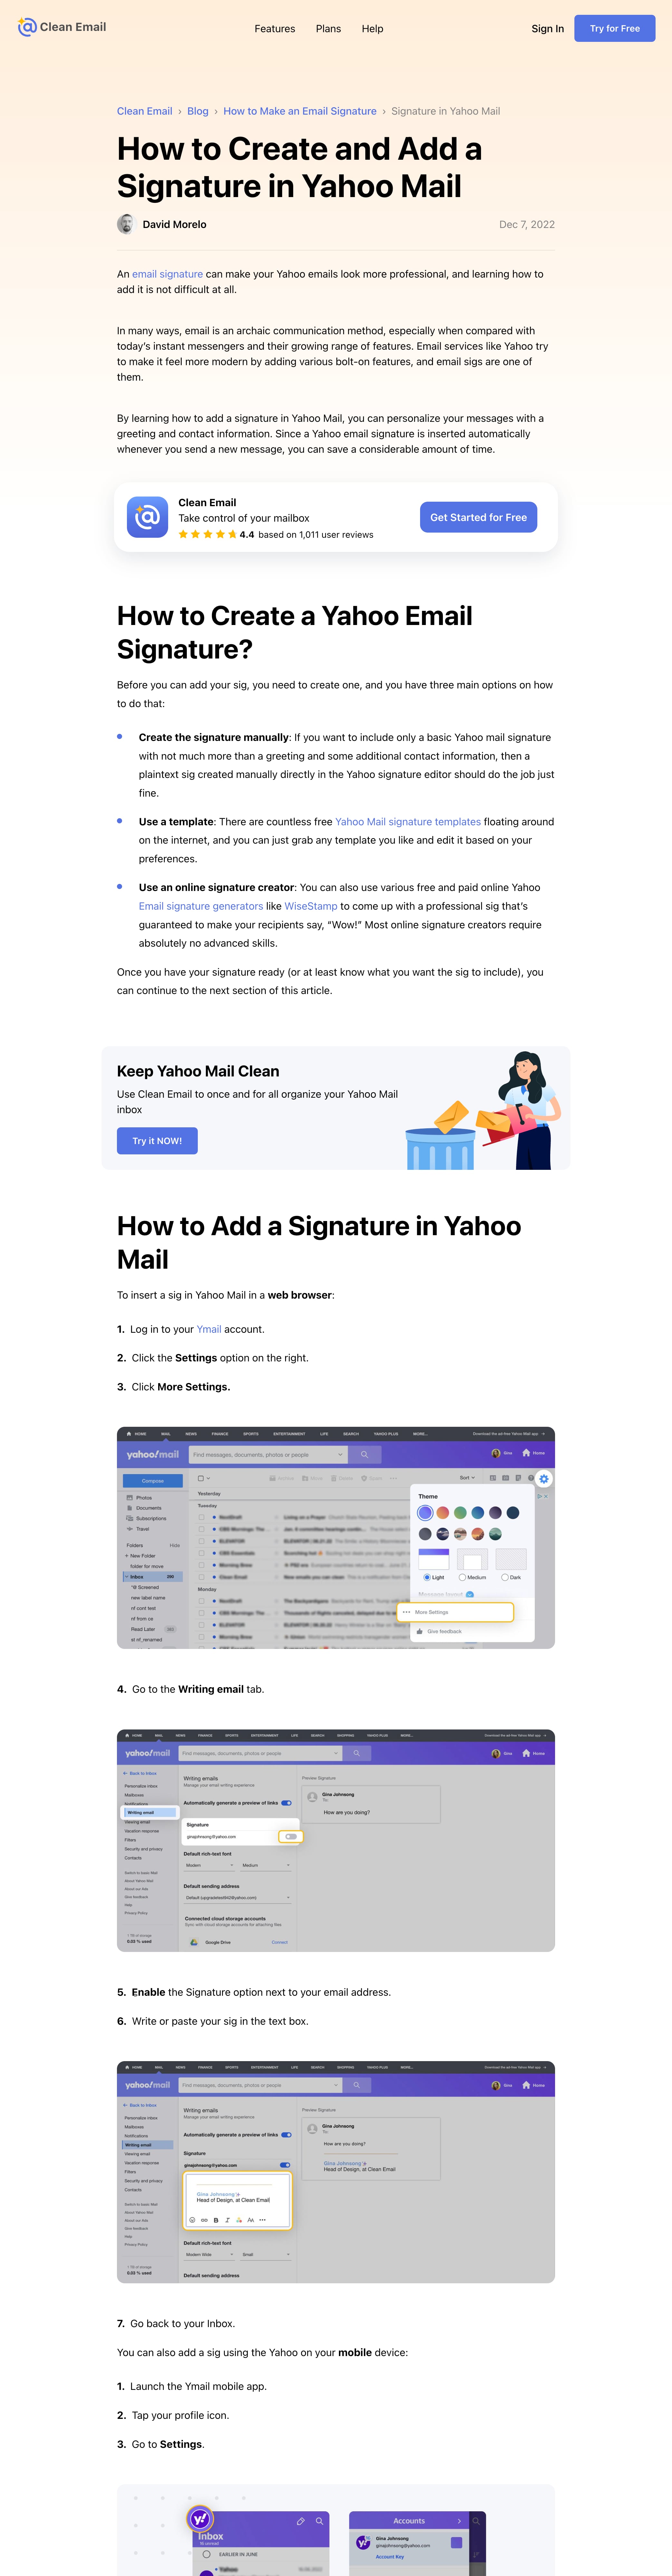 How to Create and Add a Signature in Yahoo Mail
